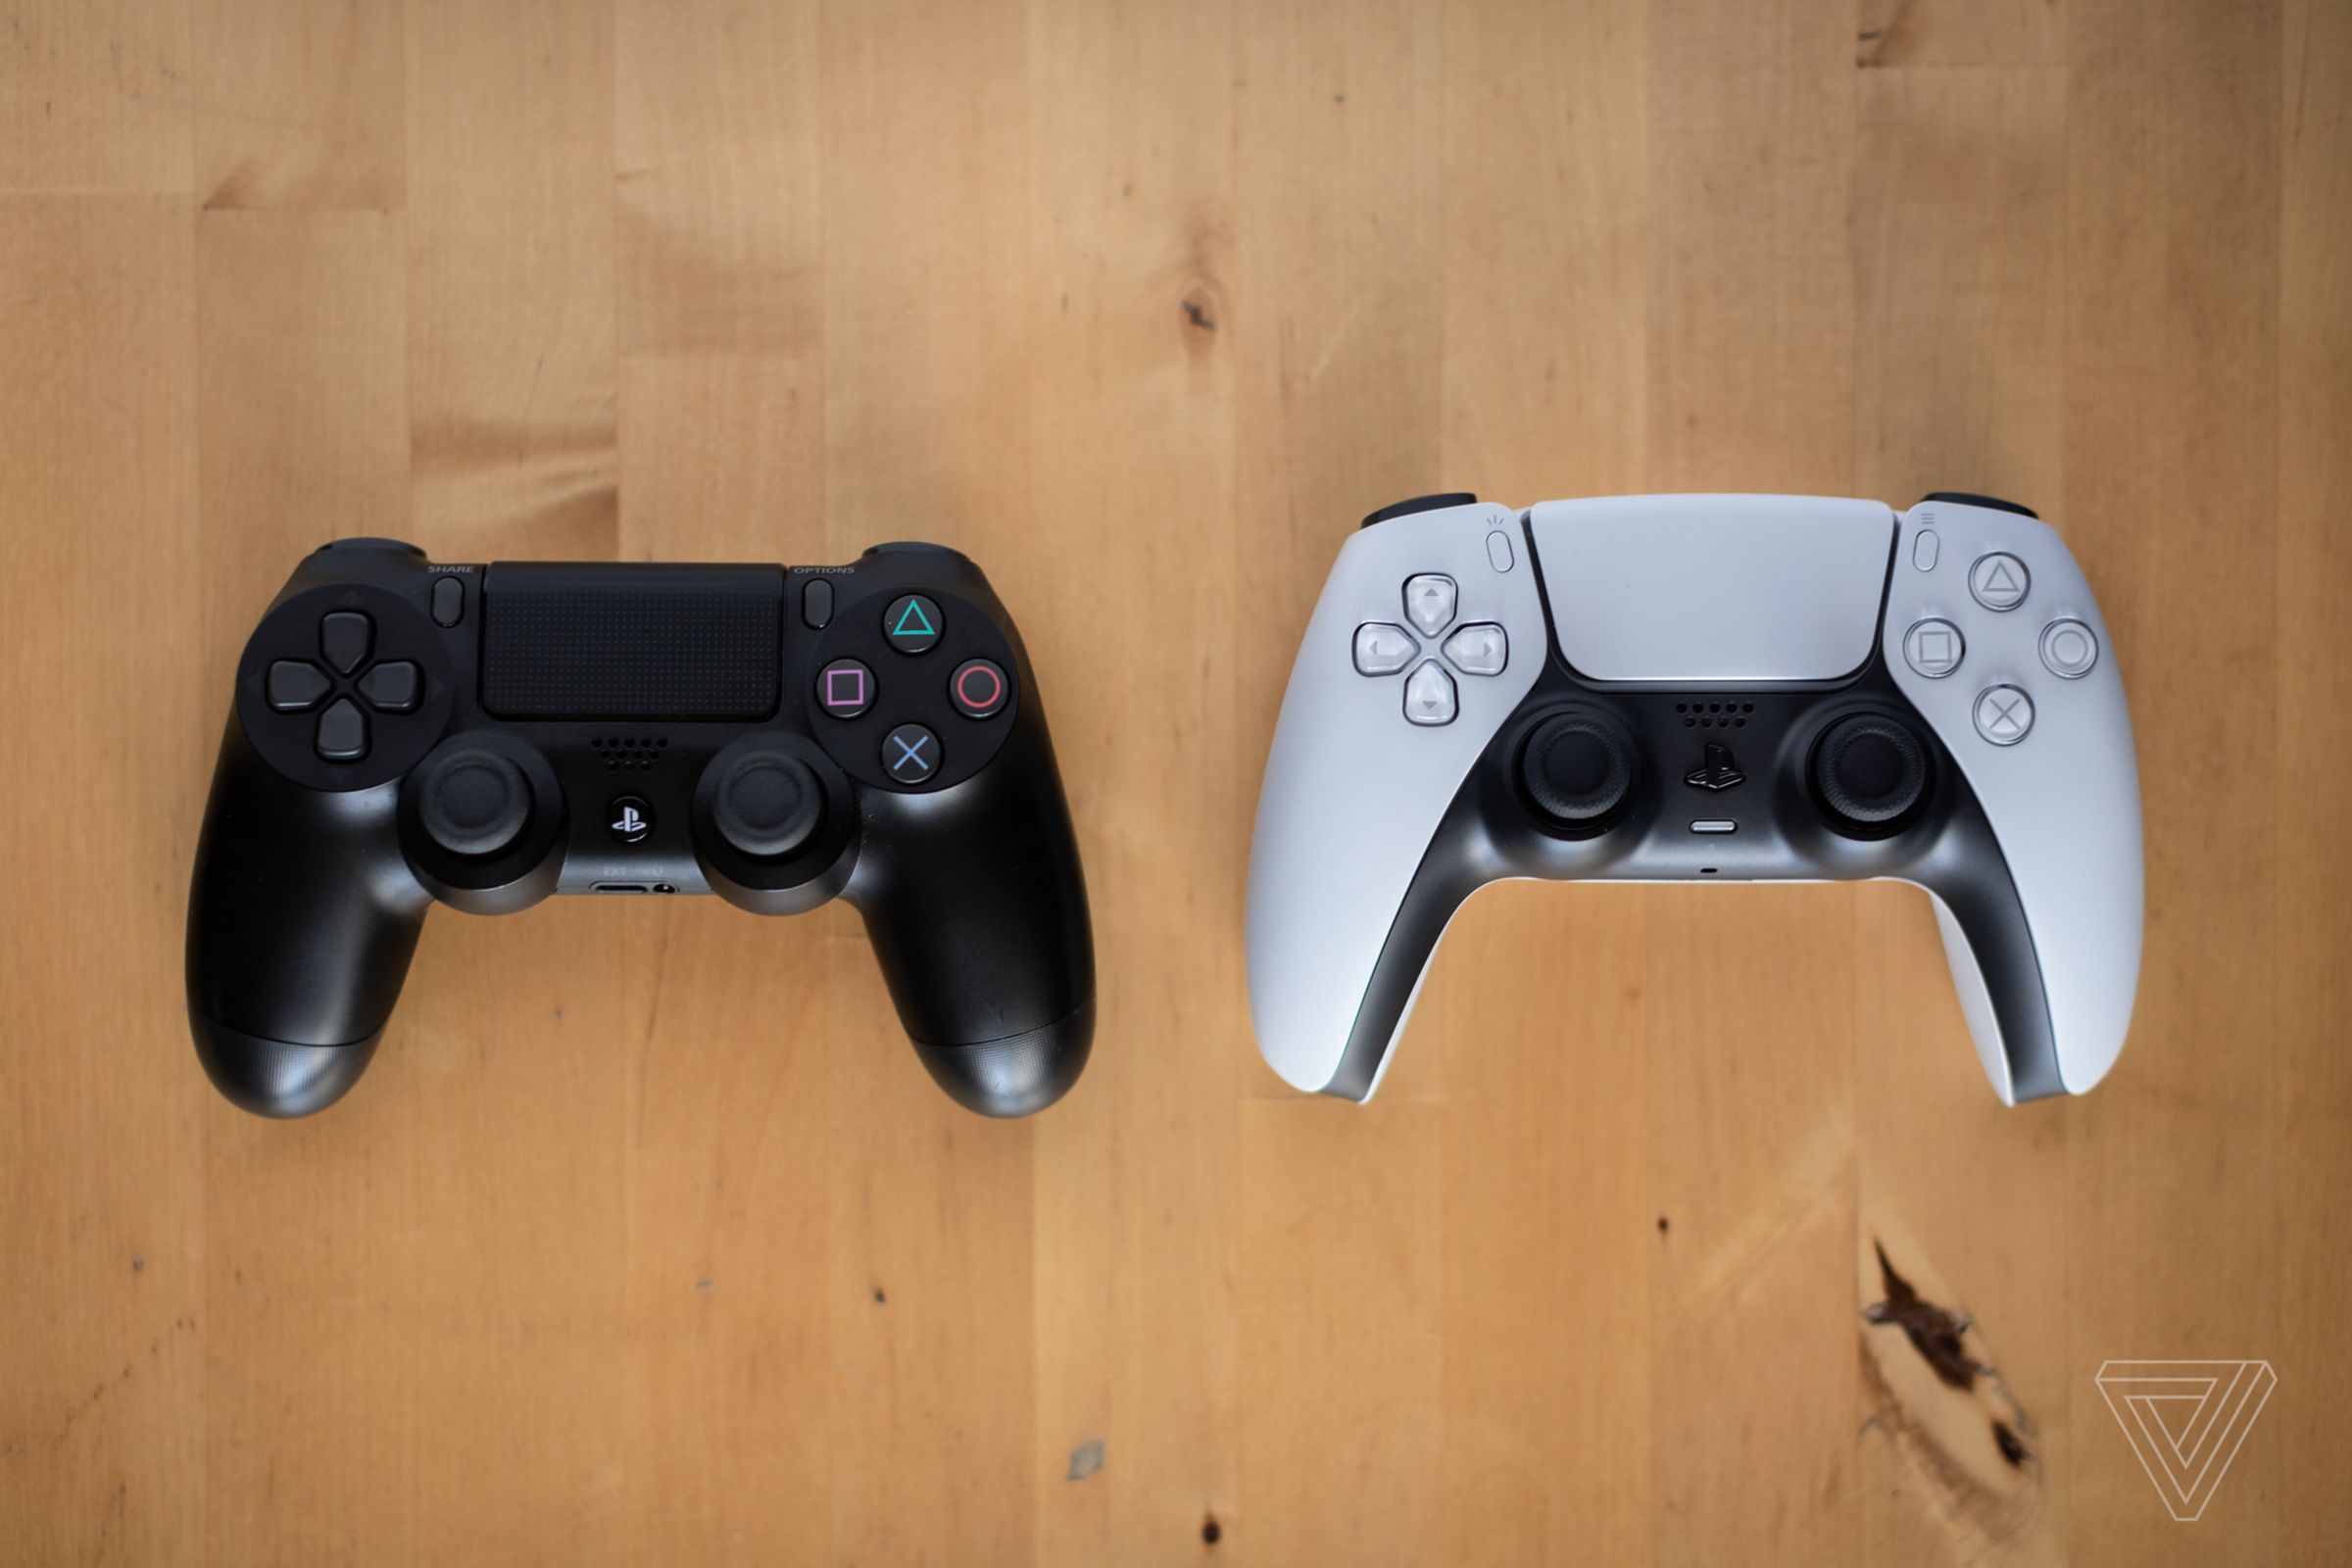 Every PS5 comes with one DualSense controller. You can use the DualShock 4 controller, but it’ll only work when you’re playing PS4 games on the next-gen console. 